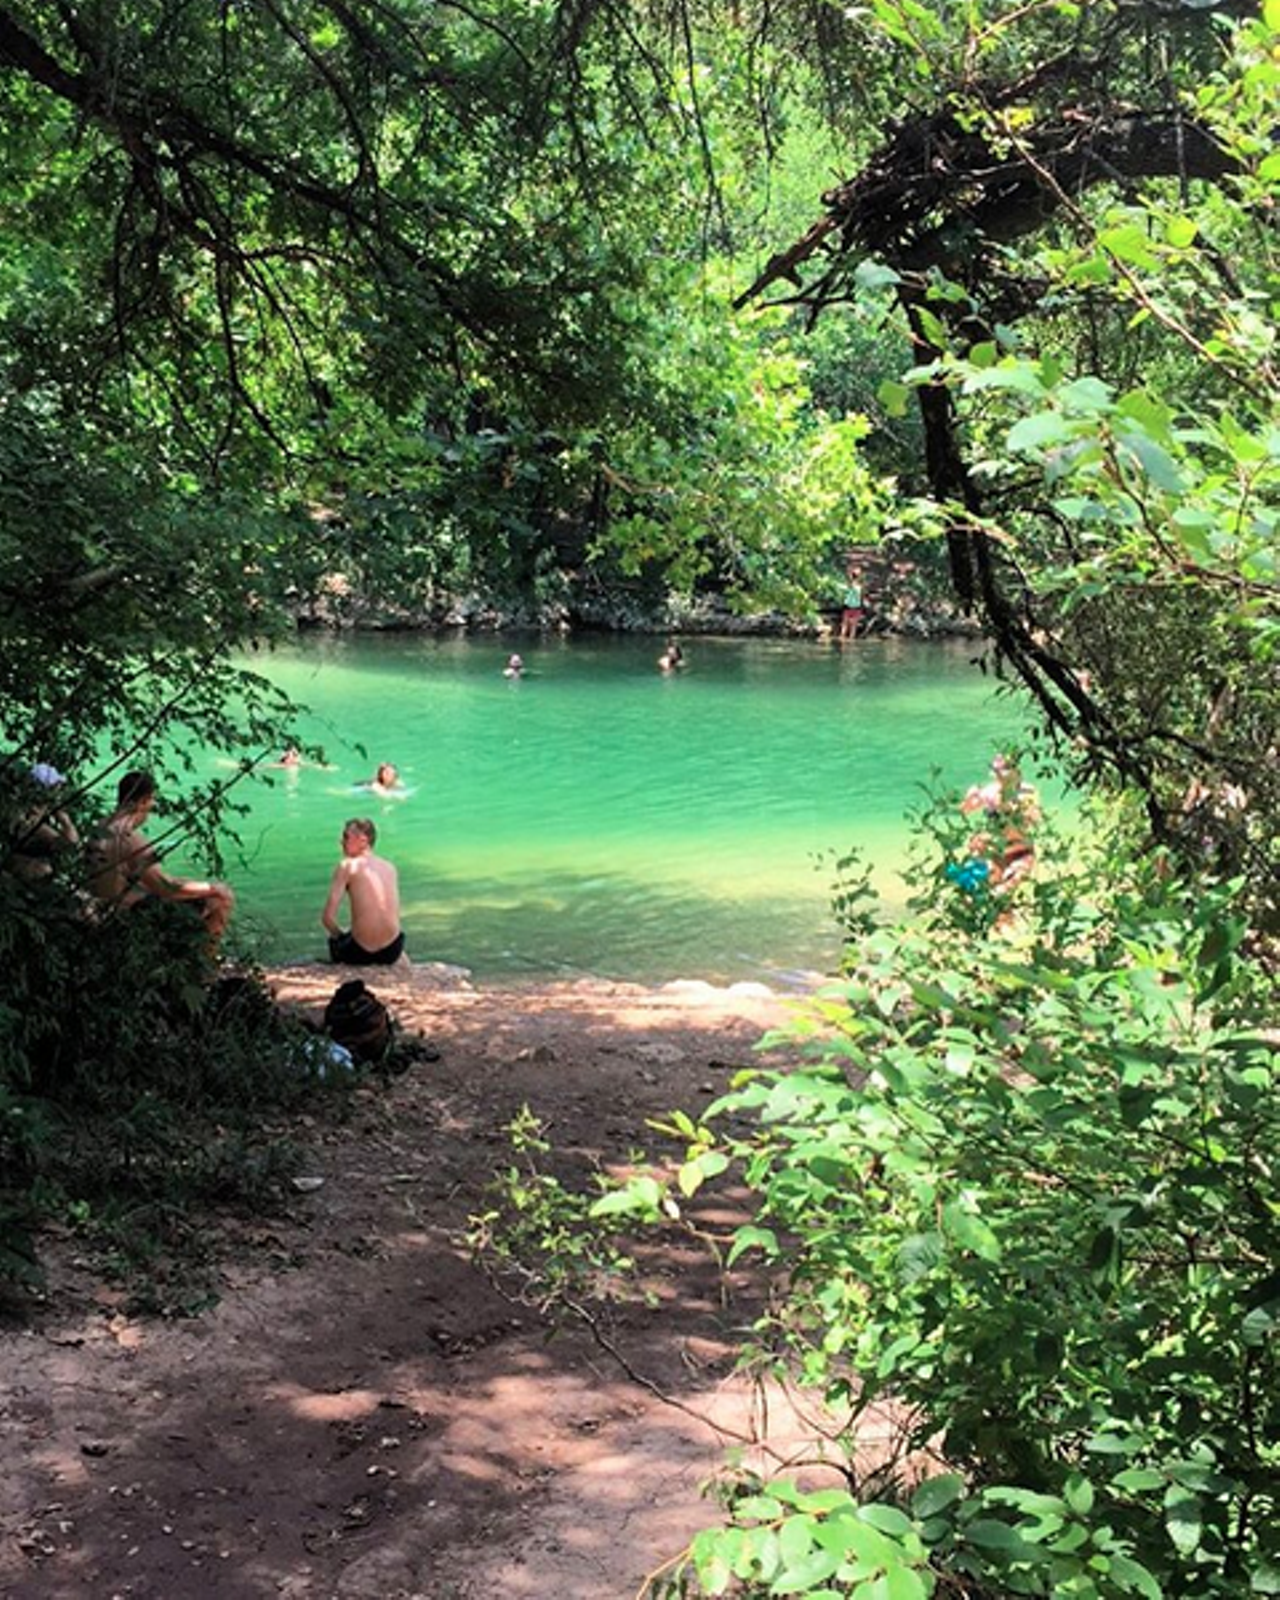 Campbell's Hole
Barton Creek, Austin, TXCampell's Hole is a few miles downstream from Twin Falls. Its closer proximity to Barton Springs pool makes it more crowded than Twin Falls, so this is the swimming hole to hit up when you want to make some new shirtless friends. 
Instagram/fink_daddy